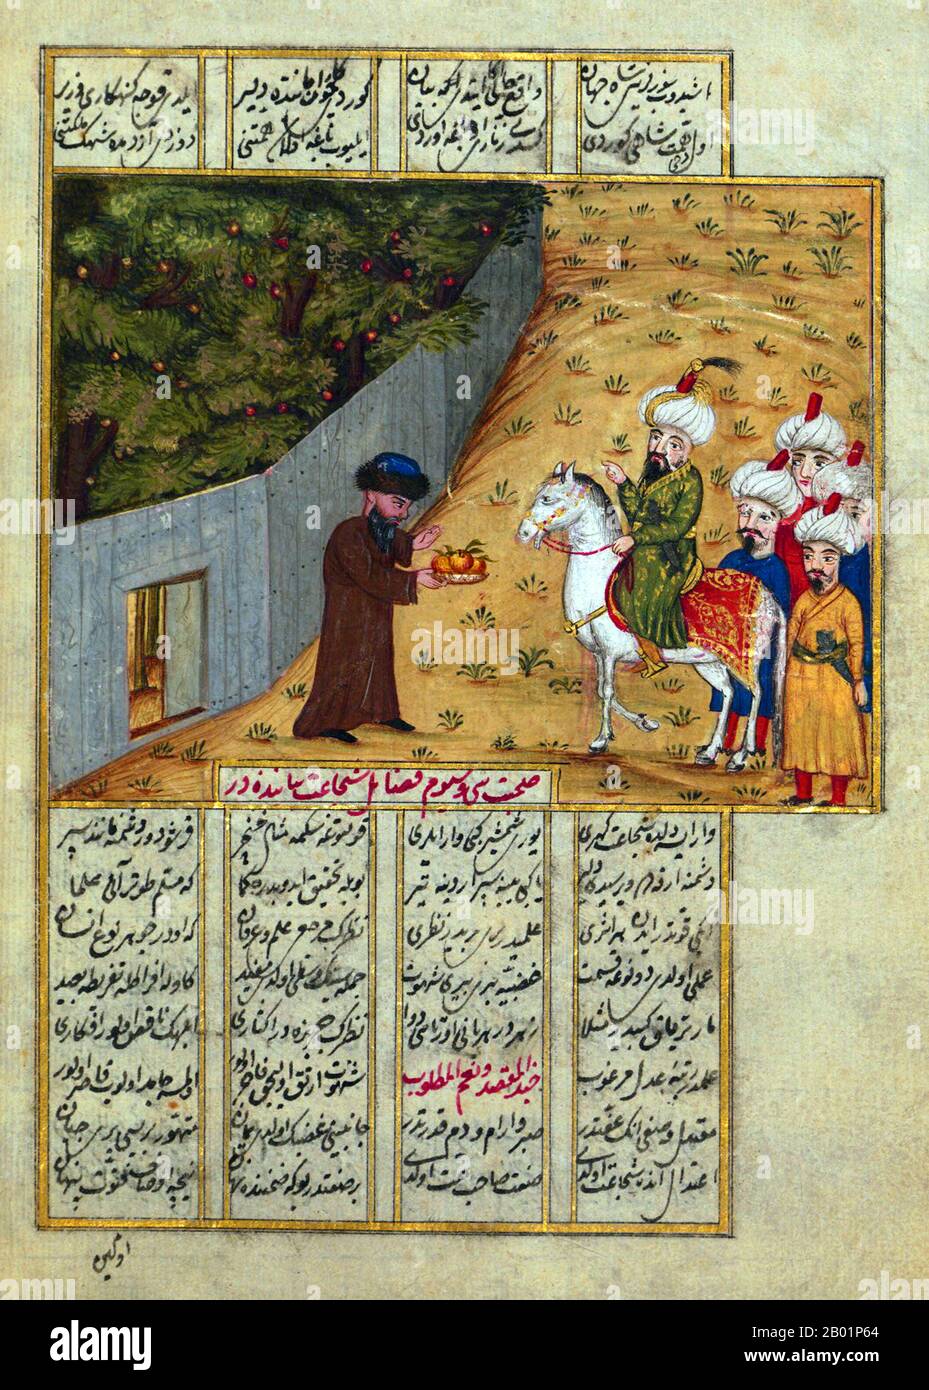 Iraq/Turkey: The Abbasid caliph al-Ma'mūn and his soldiers being greeted by a man with a tray of fruit. From the Khamsa of Nev'îzâde Atâyî (1583-1635), 1721.  Abū Jaʿfar Abdullāh al-Māʾmūn ibn Harūn (13 September 786 - 9 August 833), also spelt Almamon, Al-Maymun and el-Mâmoûn, was an Abbasid caliph who reigned from 813 until his death in 833. Stock Photo